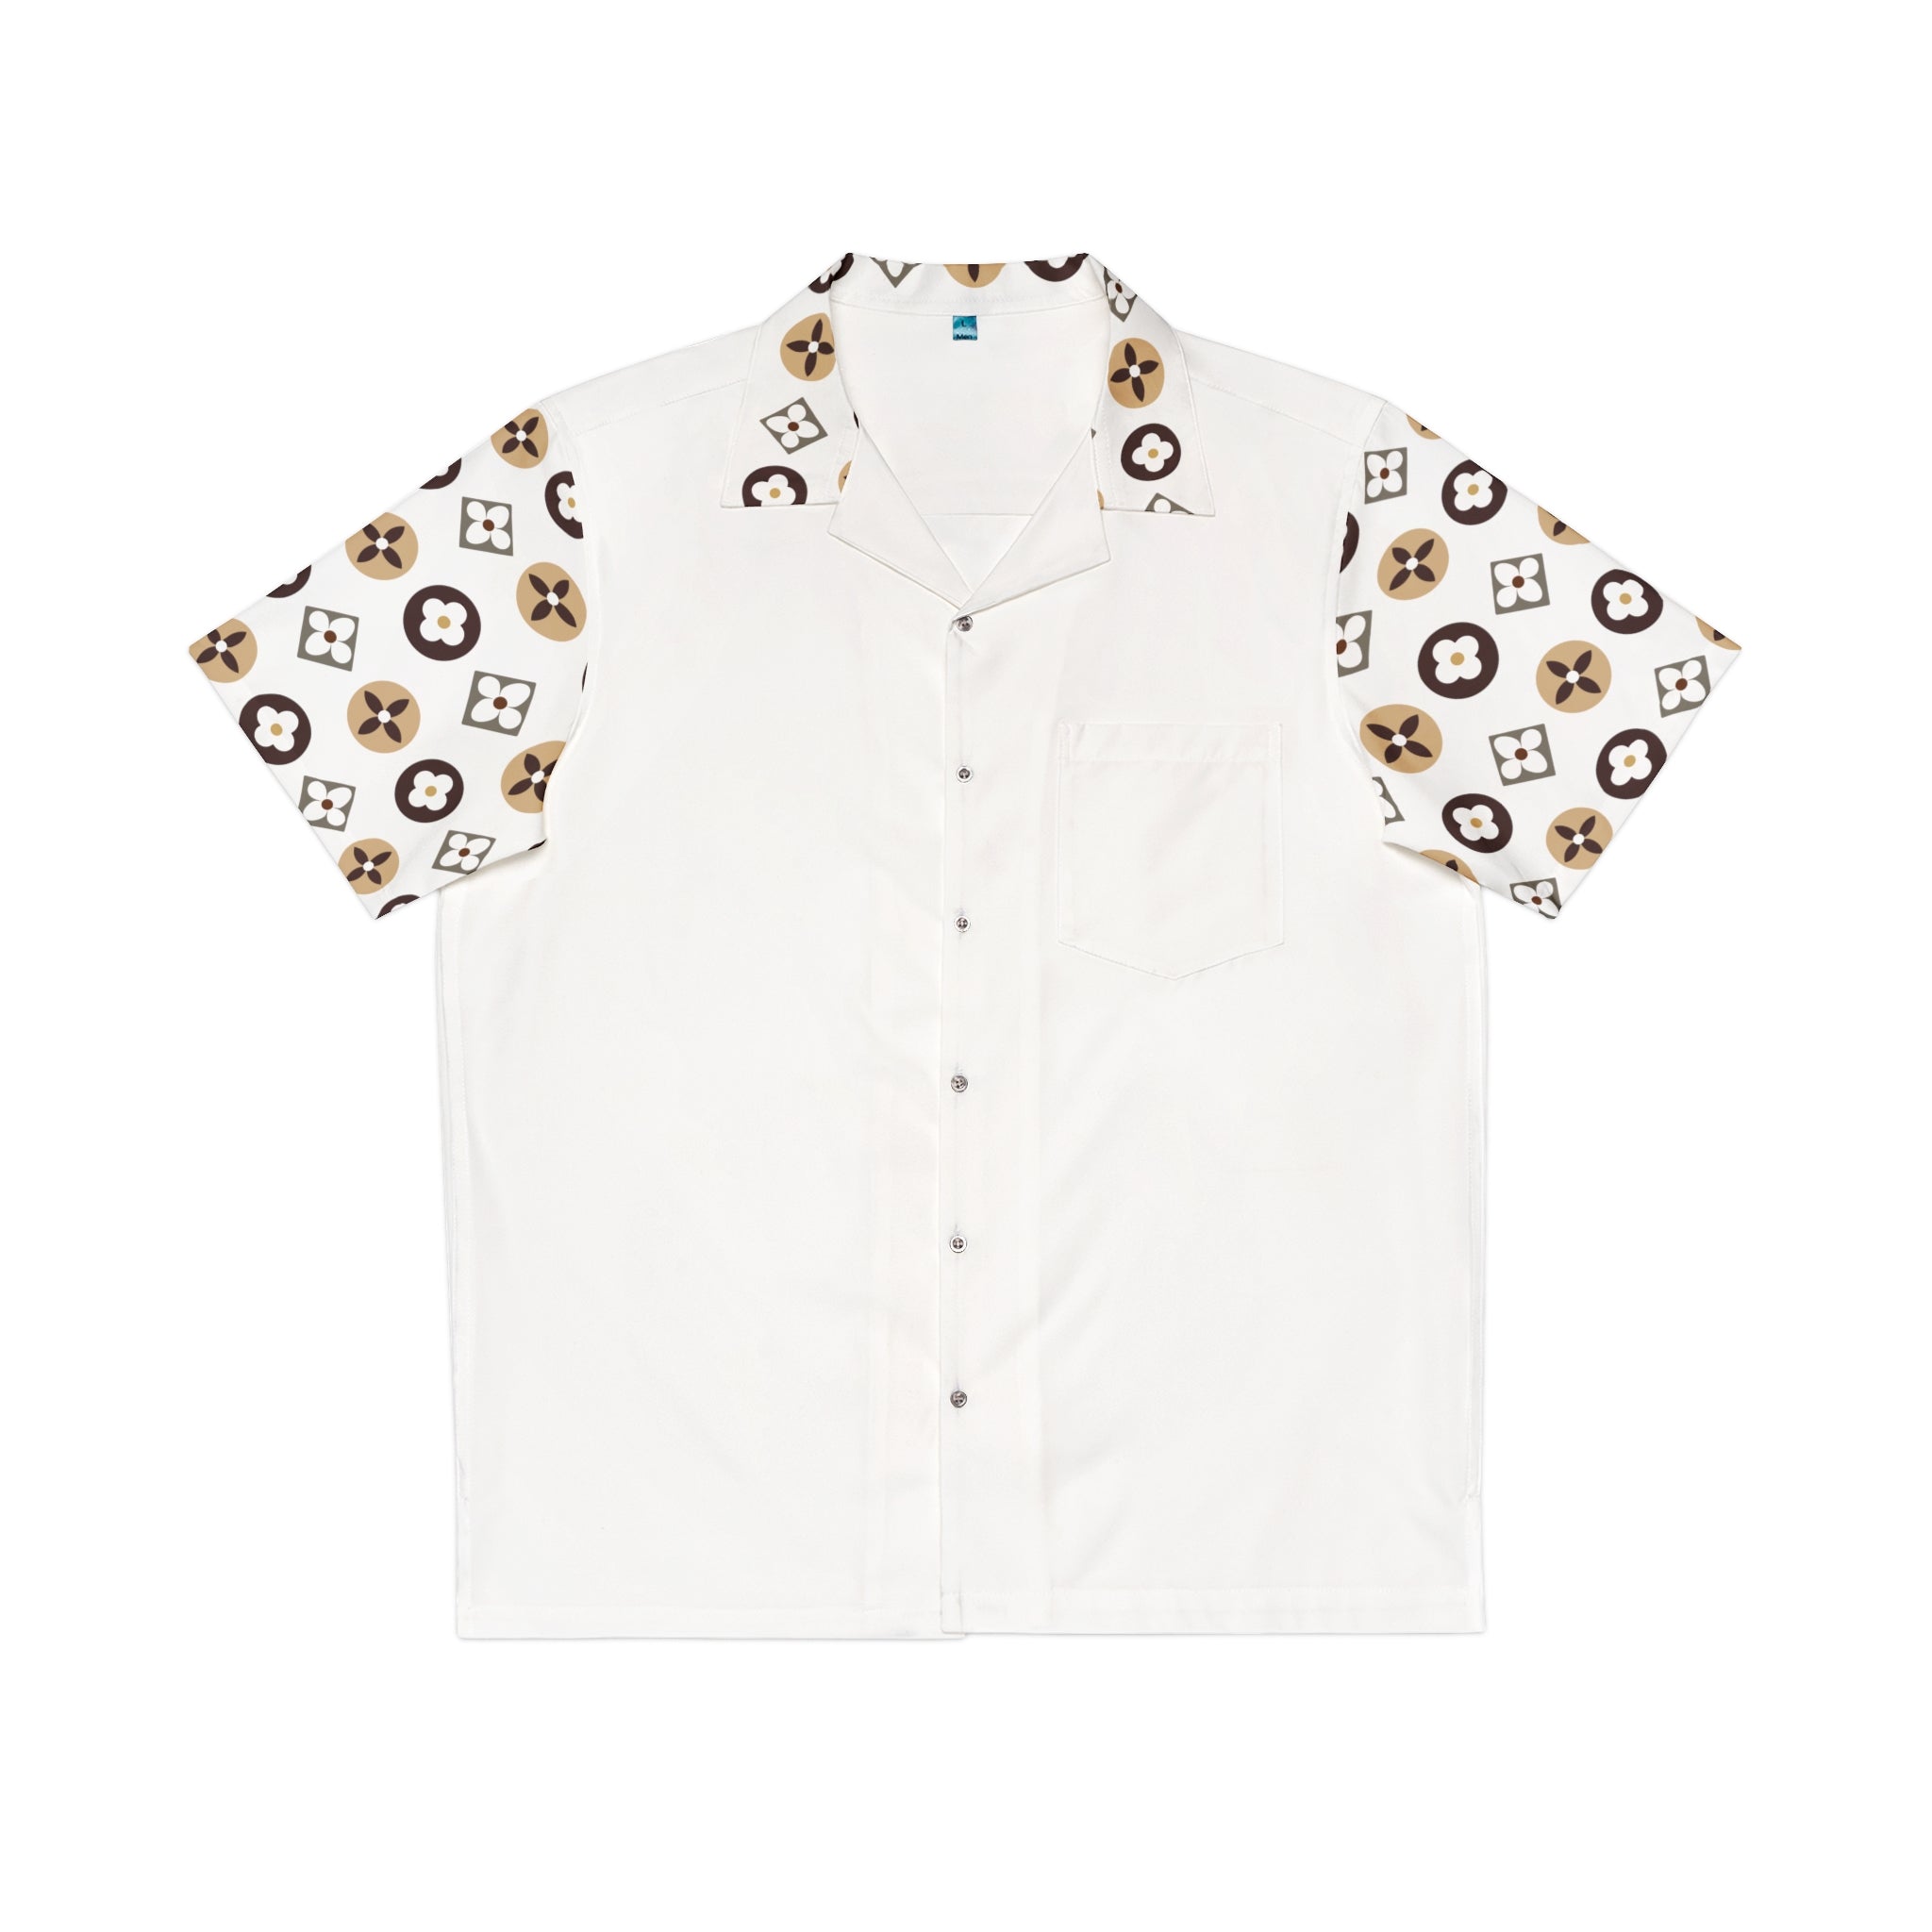  Groove Collection Trilogy of Icons Solid Block (Browns) White Unisex Gender Neutral Button Up Shirt, Hawaiian Shirt Shirts5XLWhite